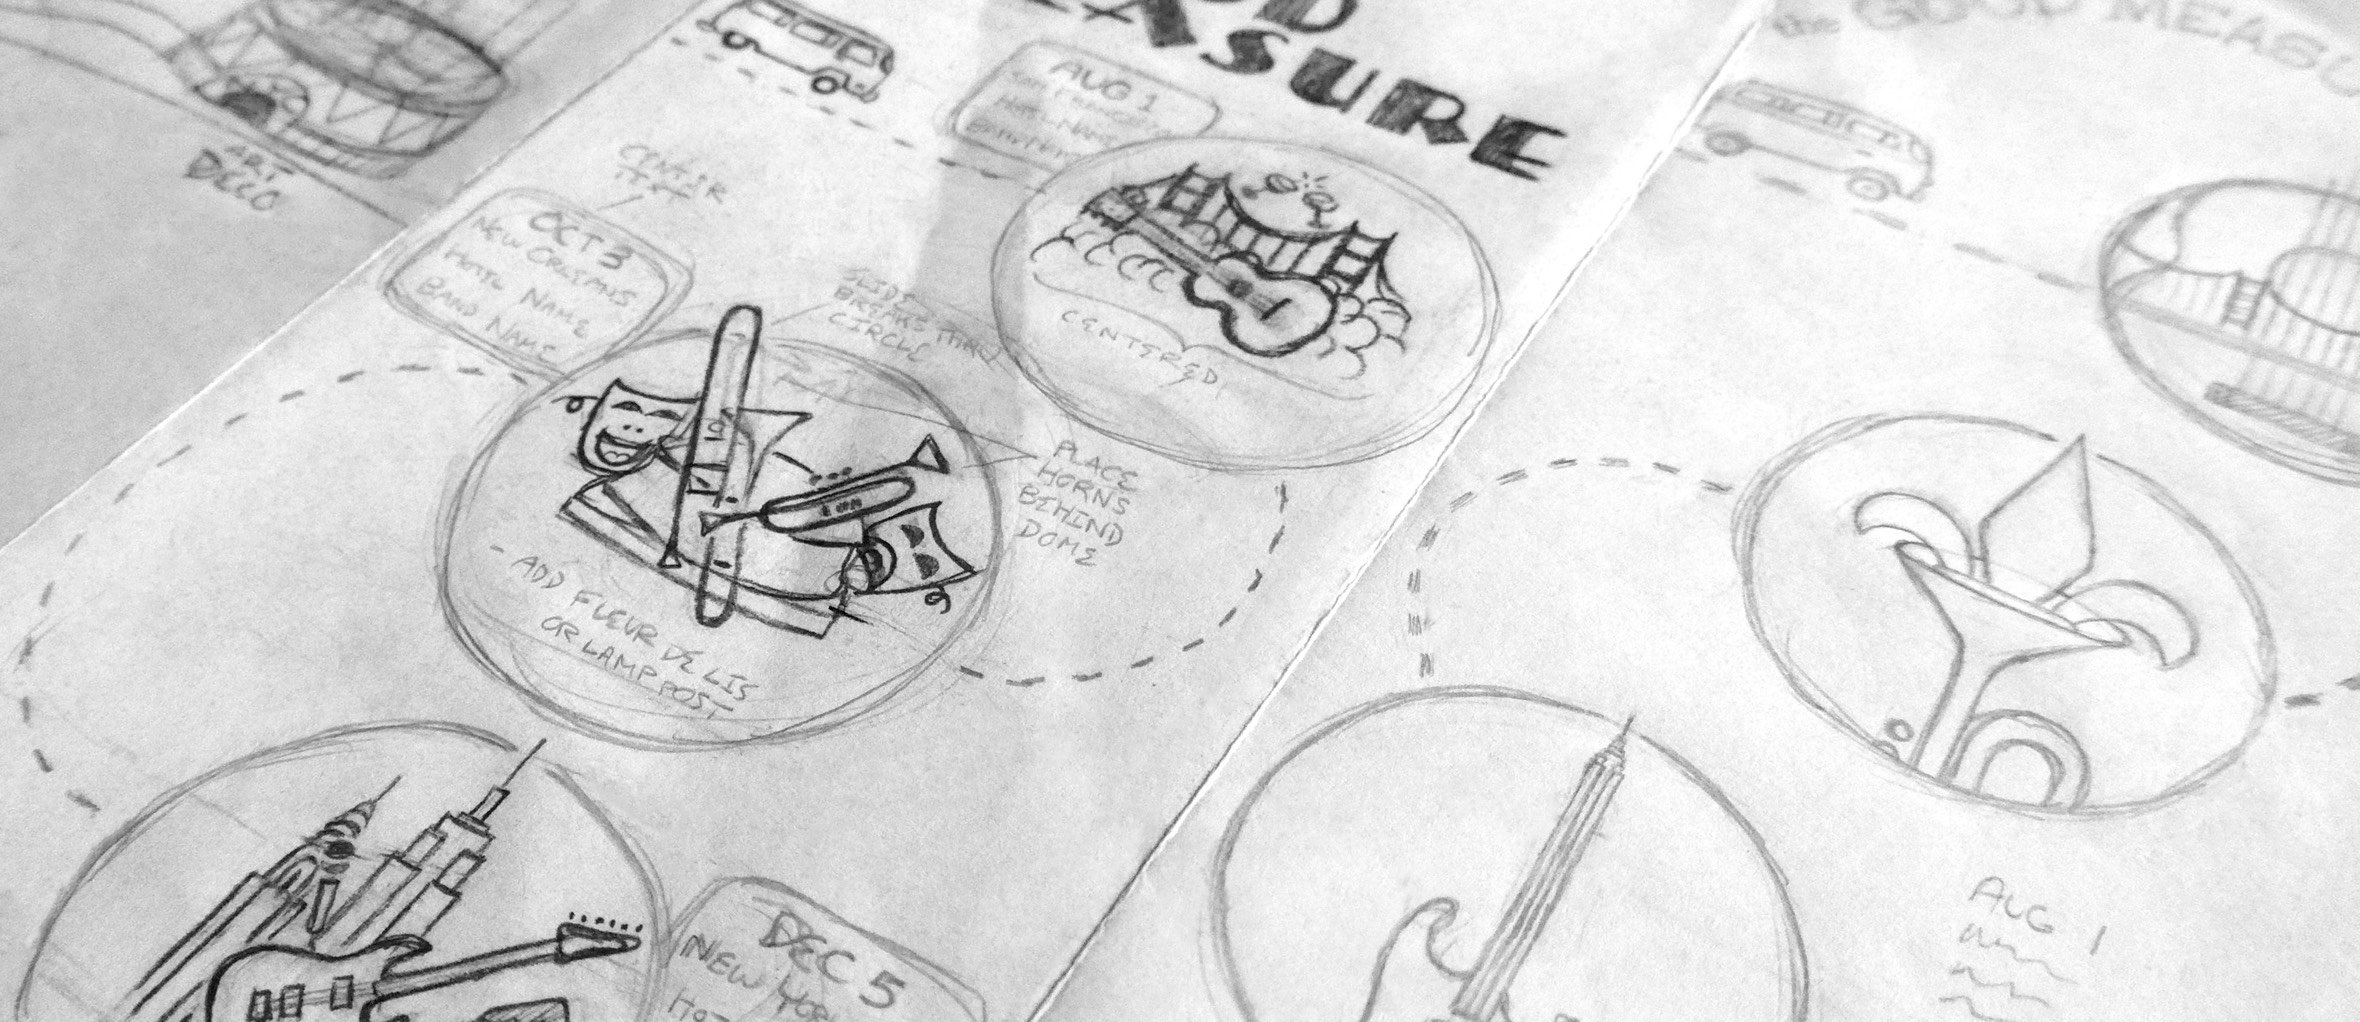 Photo of the Good Measure tour concept drawings